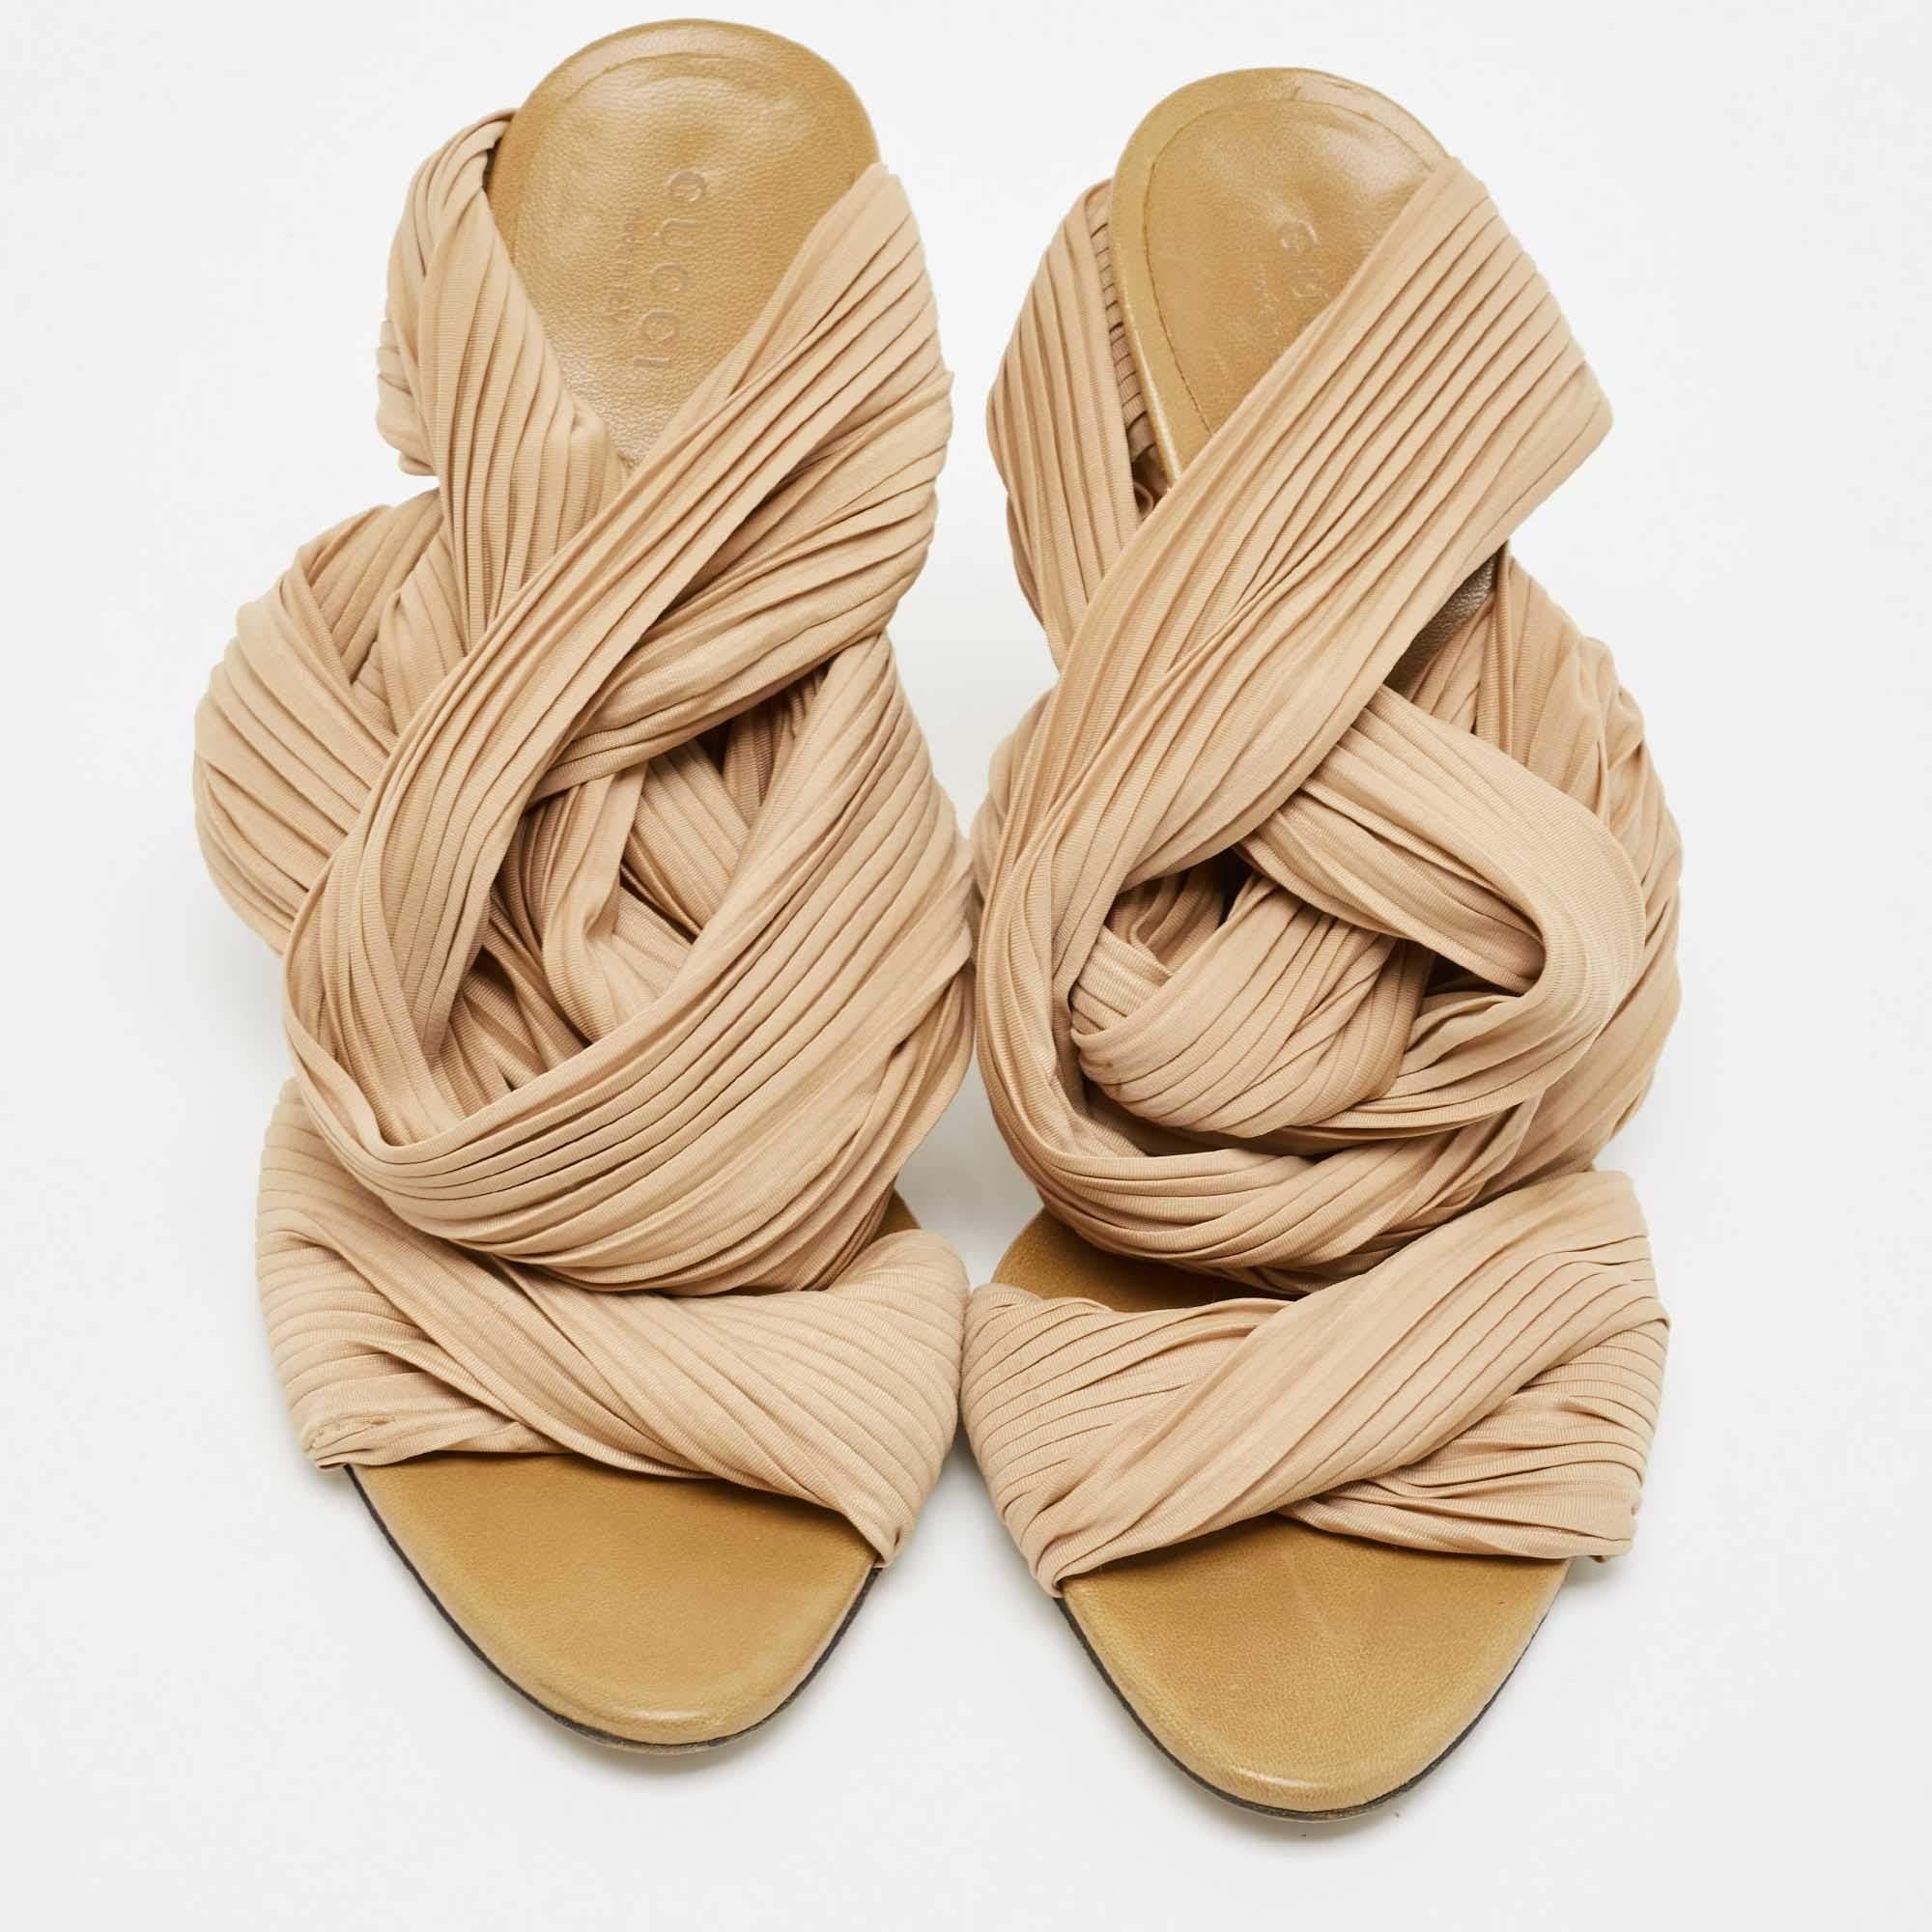 How splendid are these sandals from Gucci! They come designed with dual straps made from stretch pleated fabric and a soft nude shade which just adds to the beauty of the pair. The slides carry leather insoles and a set of 11cm heels.

